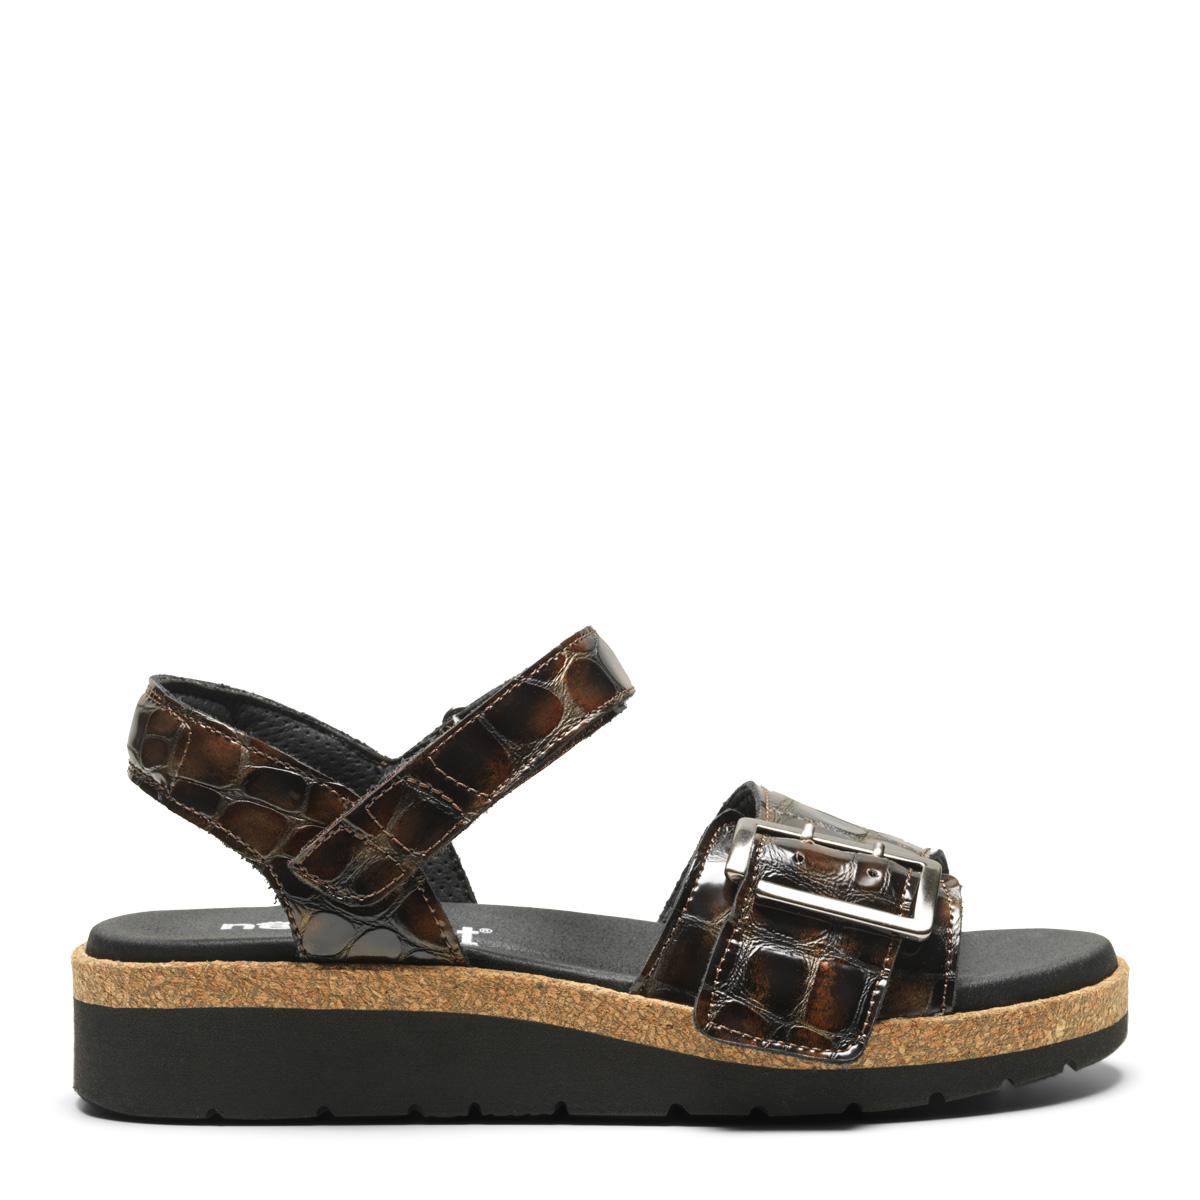 Women's sandal with adjustable velcro strap and buckle